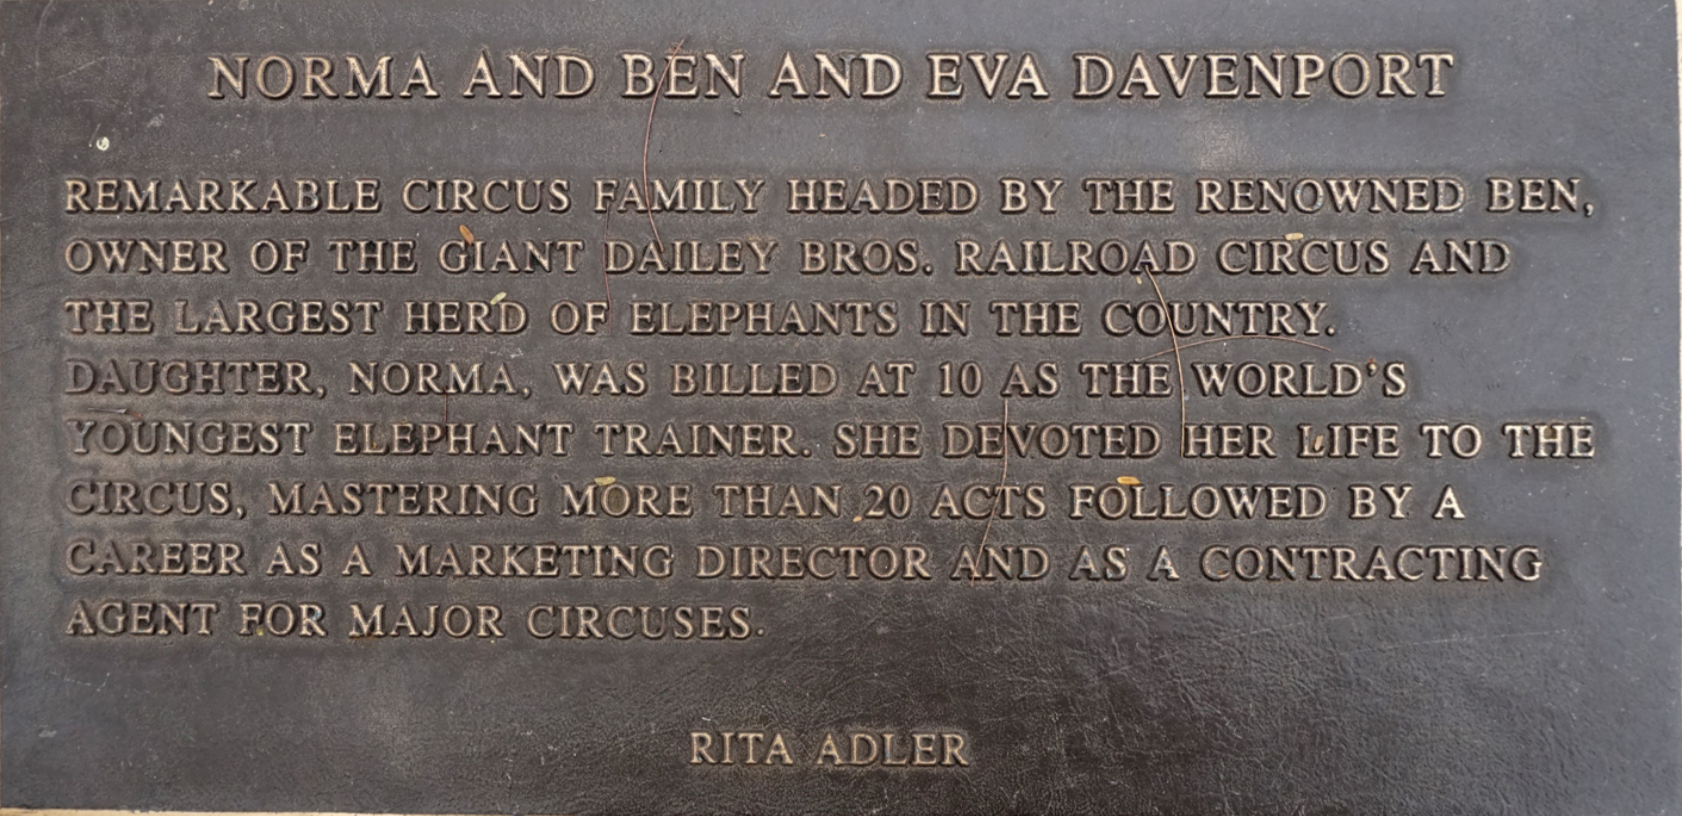 Ben Davenport Circus Ring Of Fame Foundation inductee plaque